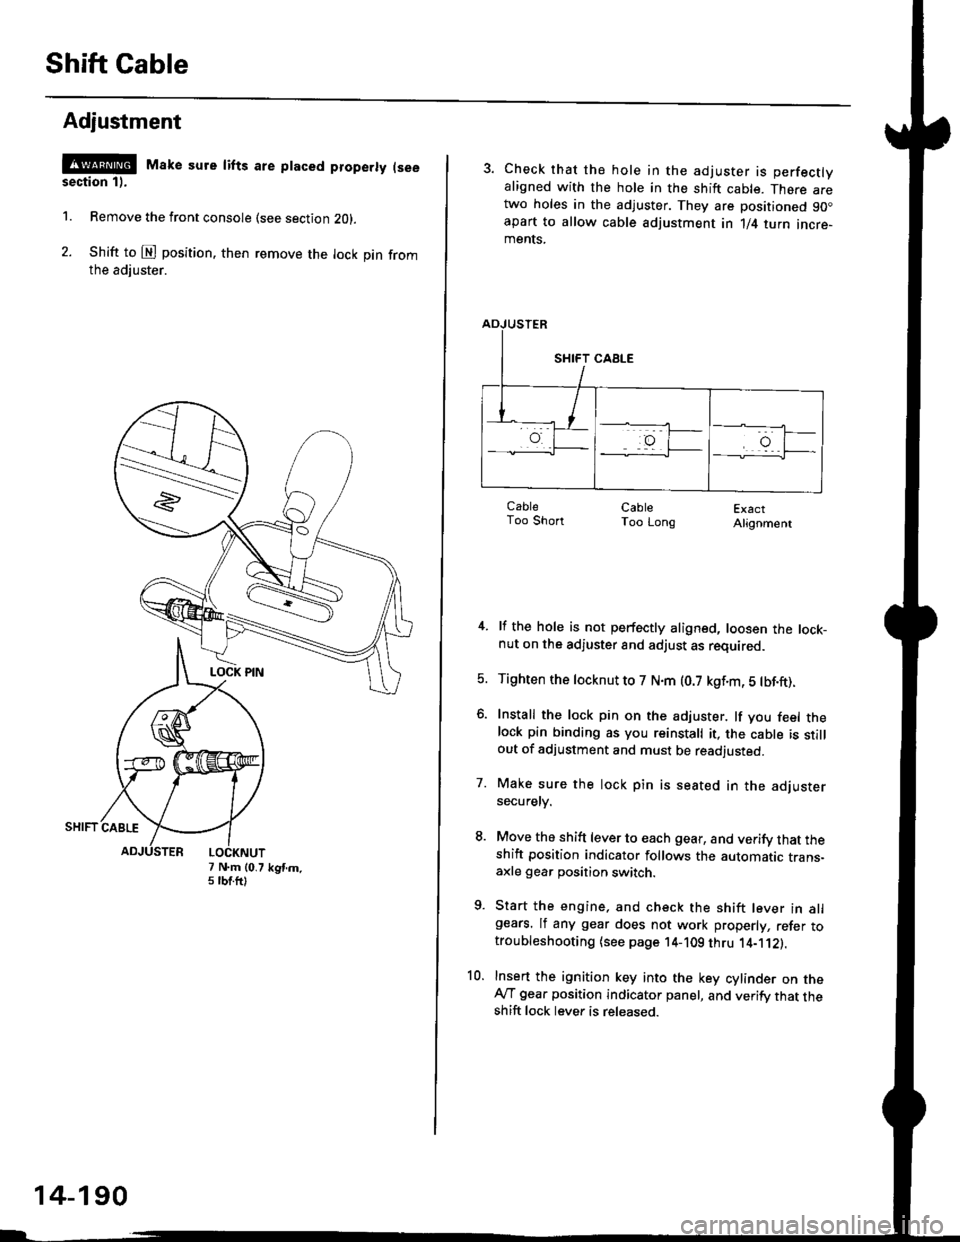 HONDA CIVIC 1999 6.G Workshop Manual Shift Cable
Adjustment
@ Make sure lifts are ptaced properly (see
section 1).
1. Remove the front console (see section Z0l.
2. Shift to @ position. then remove the lock pin fromthe adiuster.
7 N.m (0.